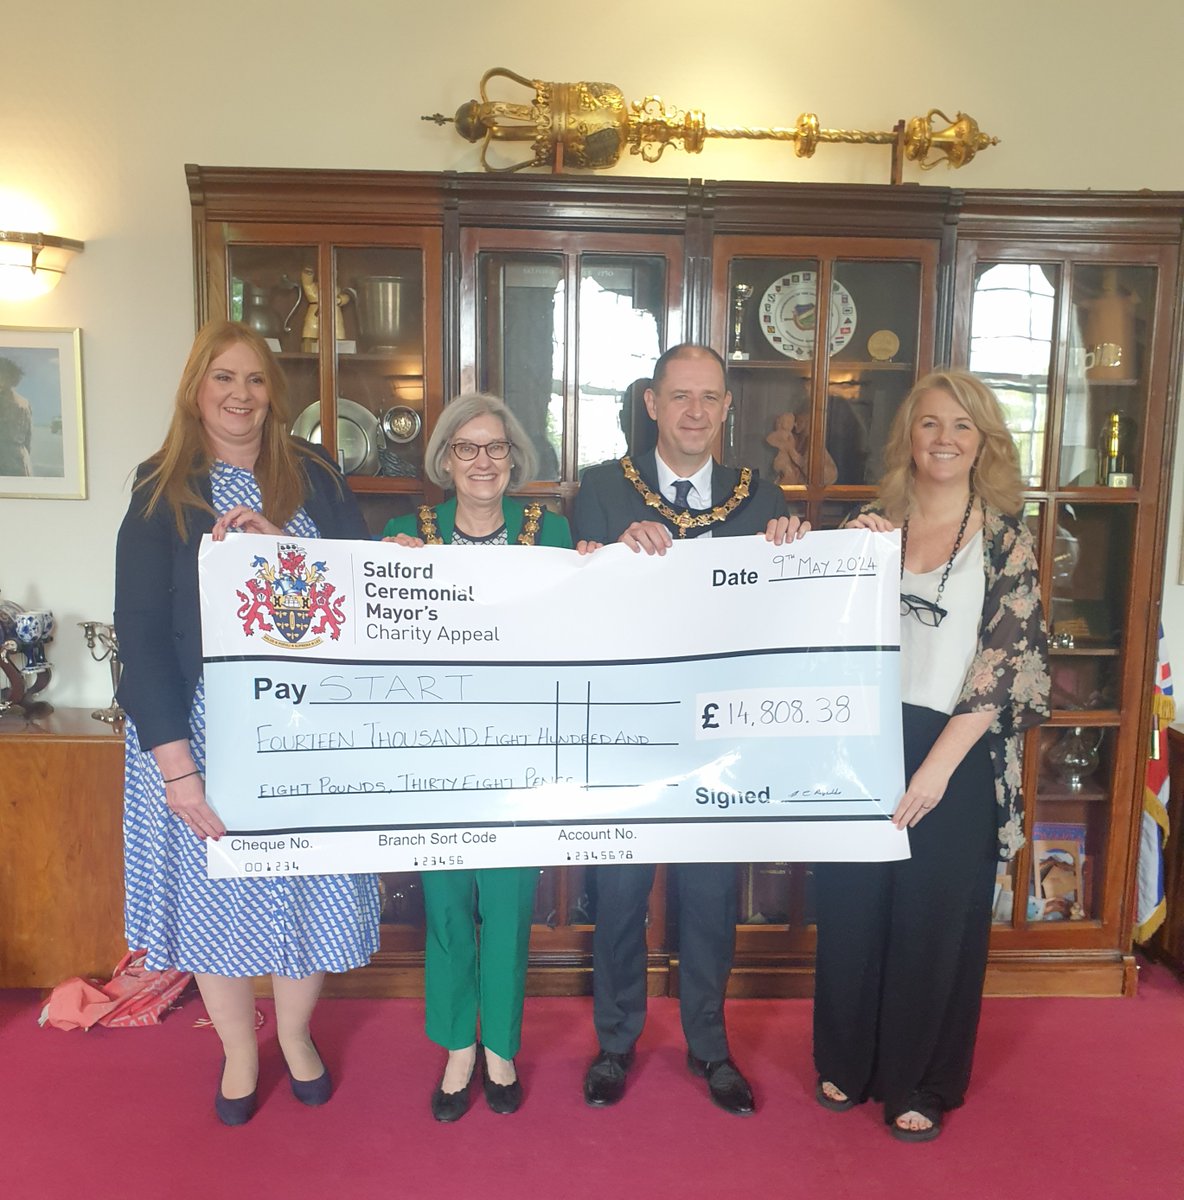 In her year in office the Ceremonial Mayor of Salford, Councillor Gina Reynolds @Gina4Labour has raised an incredible £44,425.15 for her charities. These are St Ann’s Hospice (Little Hulton), START and Agnes Hopkins Community Centre.